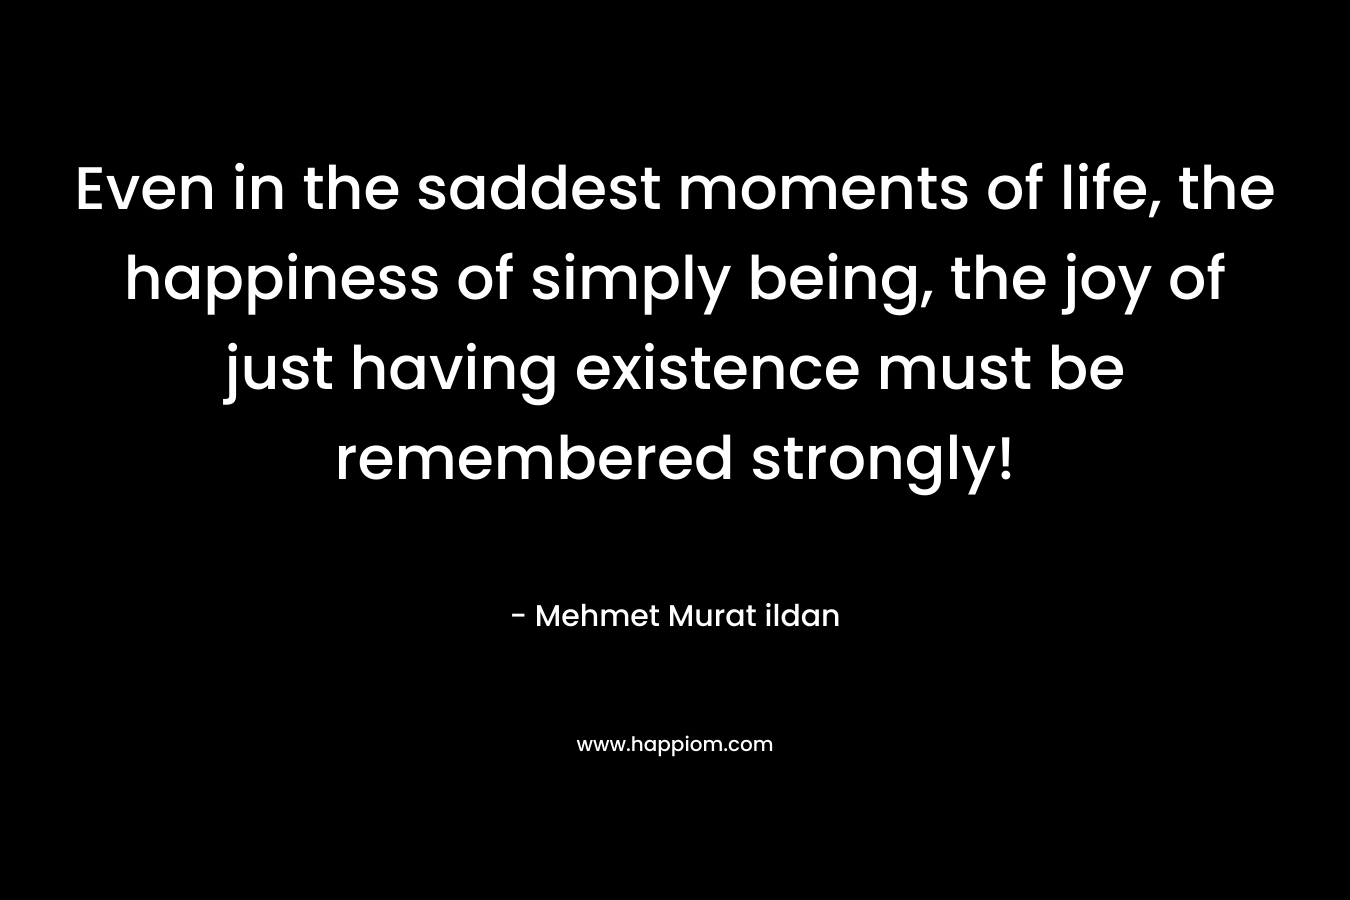 Even in the saddest moments of life, the happiness of simply being, the joy of just having existence must be remembered strongly!